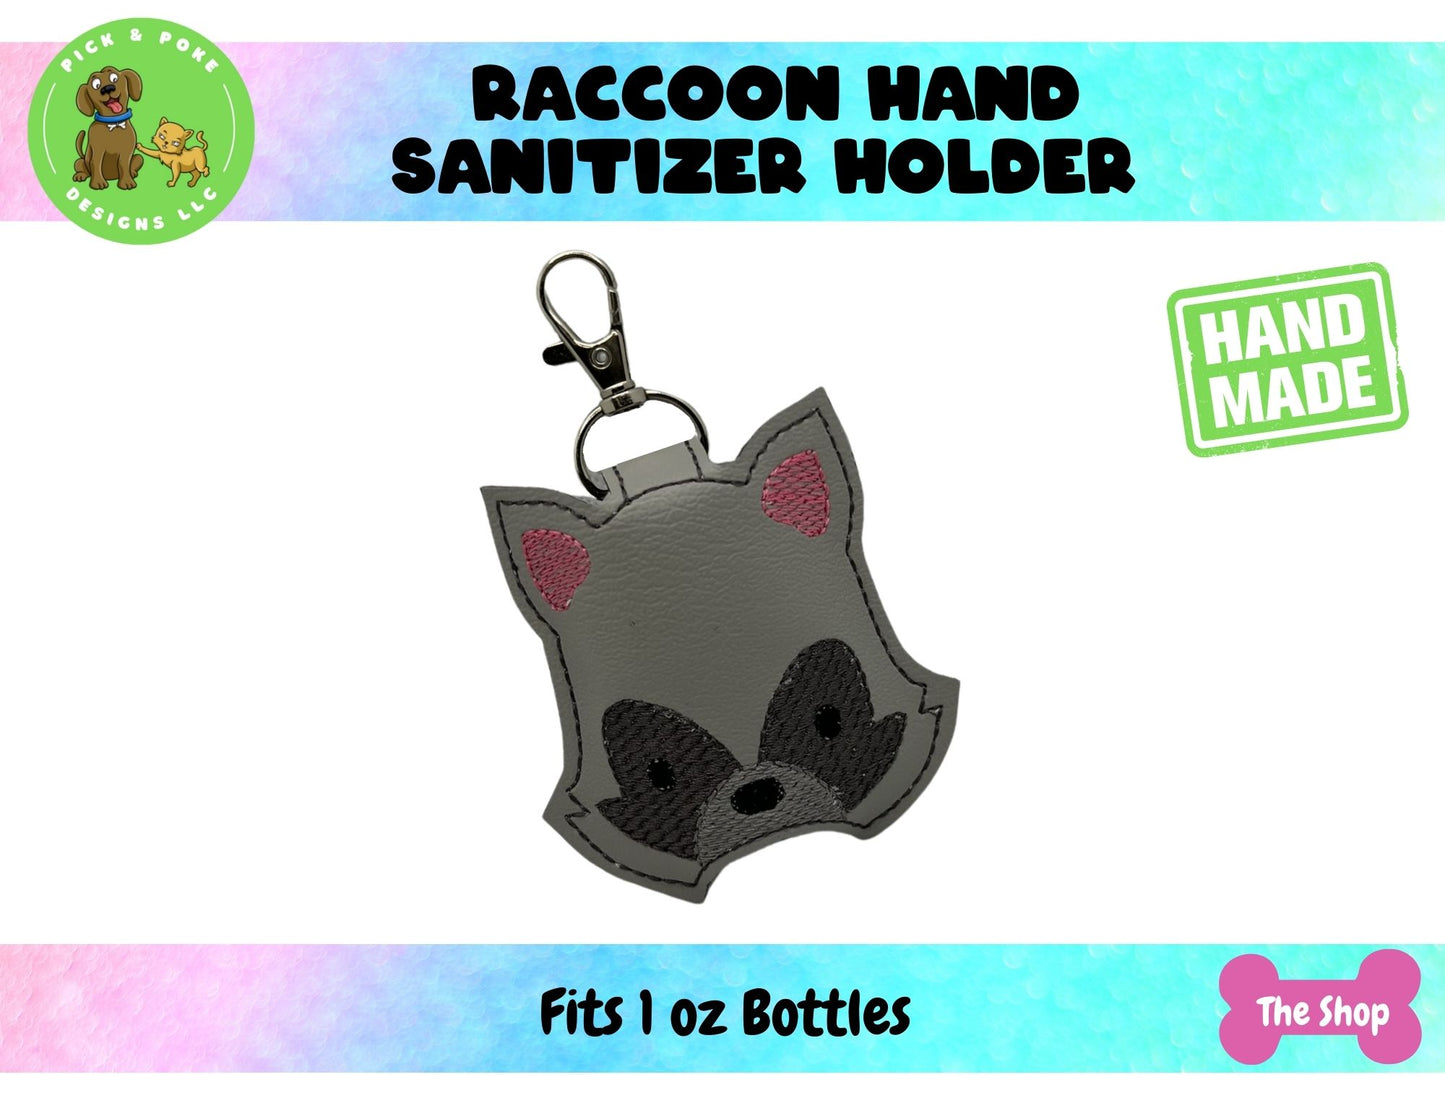 Raccoon Trash Panda Sanitizer Holder Key Chain | Embroidered on Vinyl | Made to Order